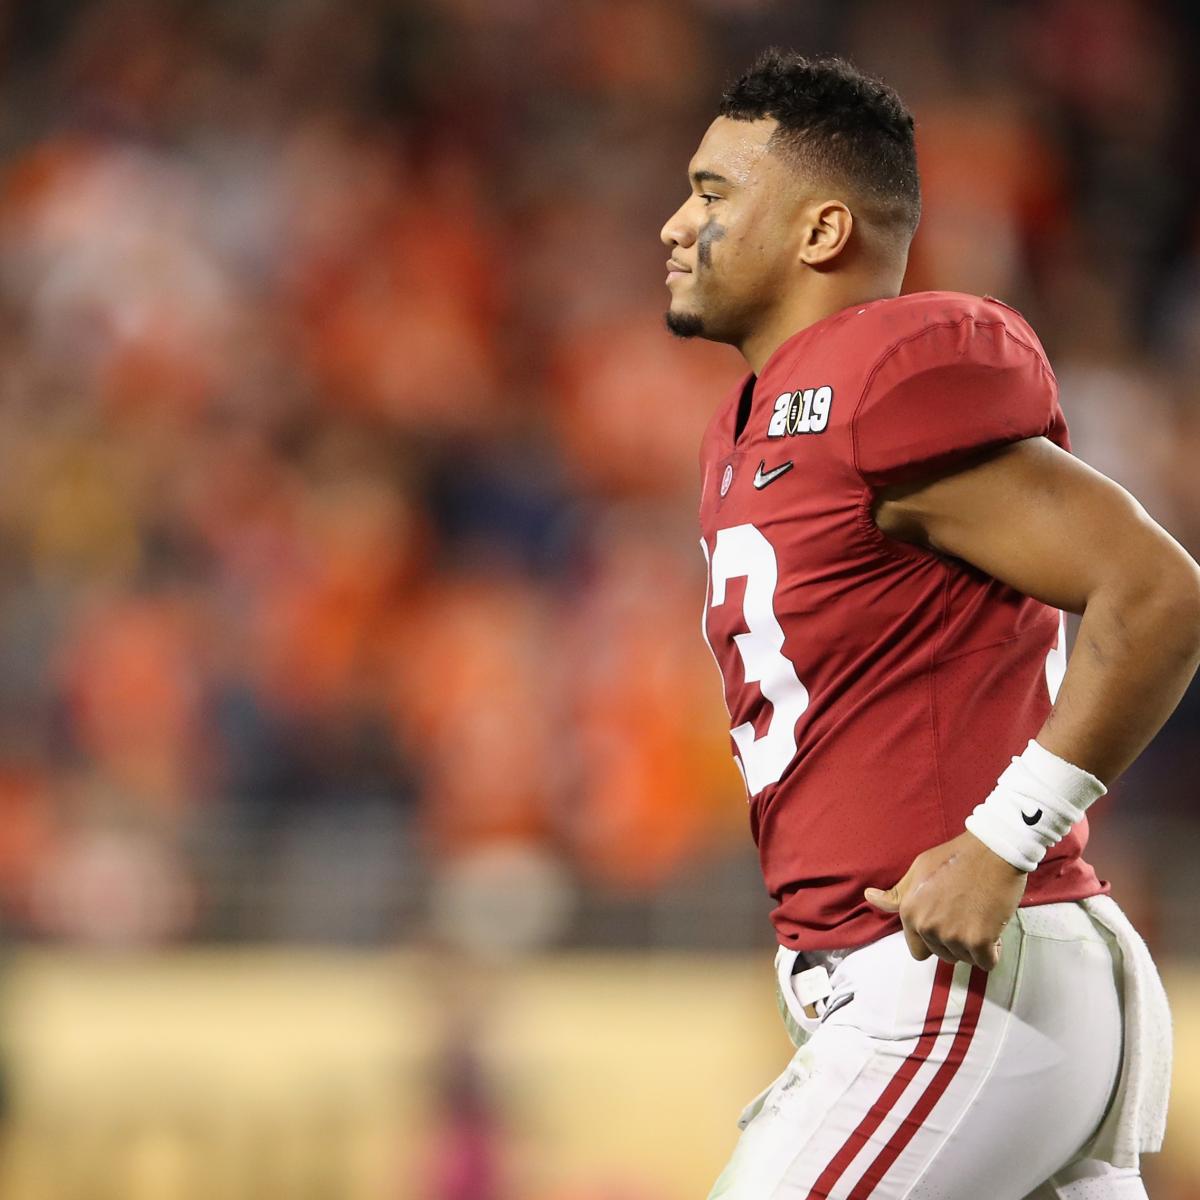 Tua Tagovailoa's stats compared to fellow 2020 draftee quarterback Justin  Herbert paint a surprising picture